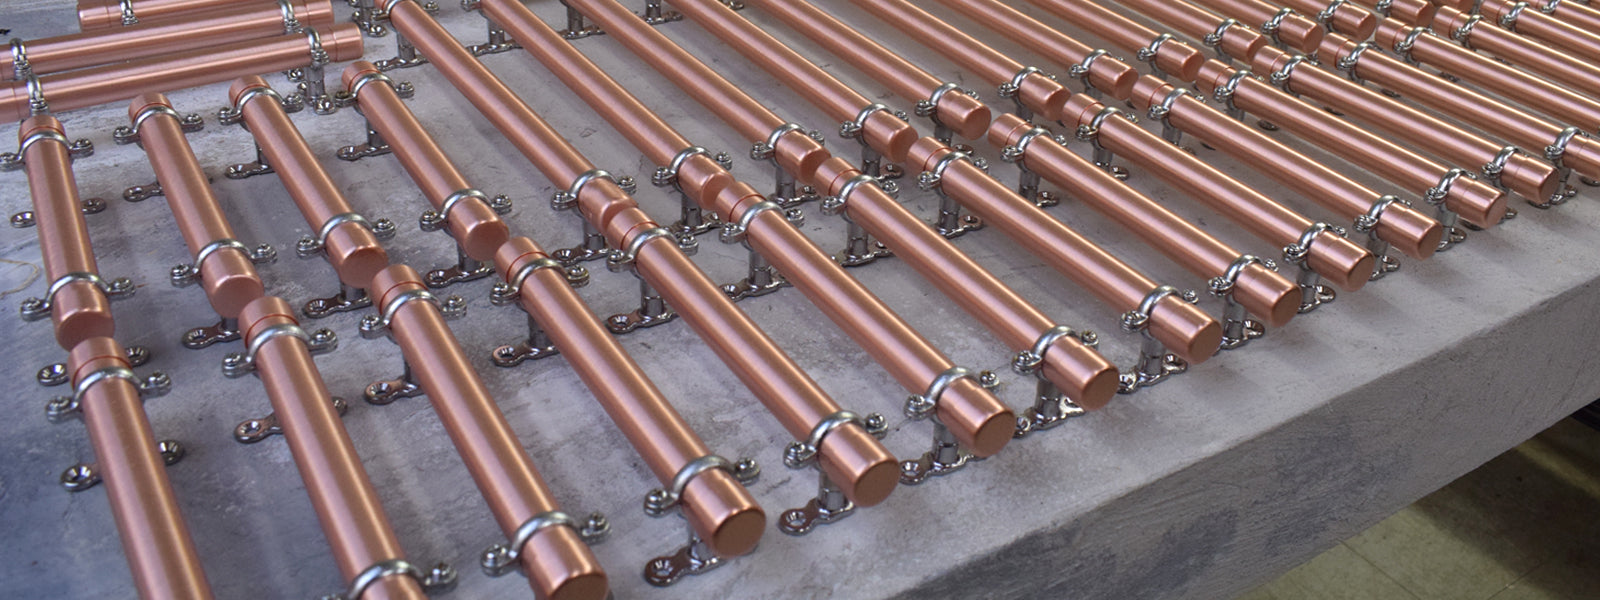 orders of copper handles at quality control